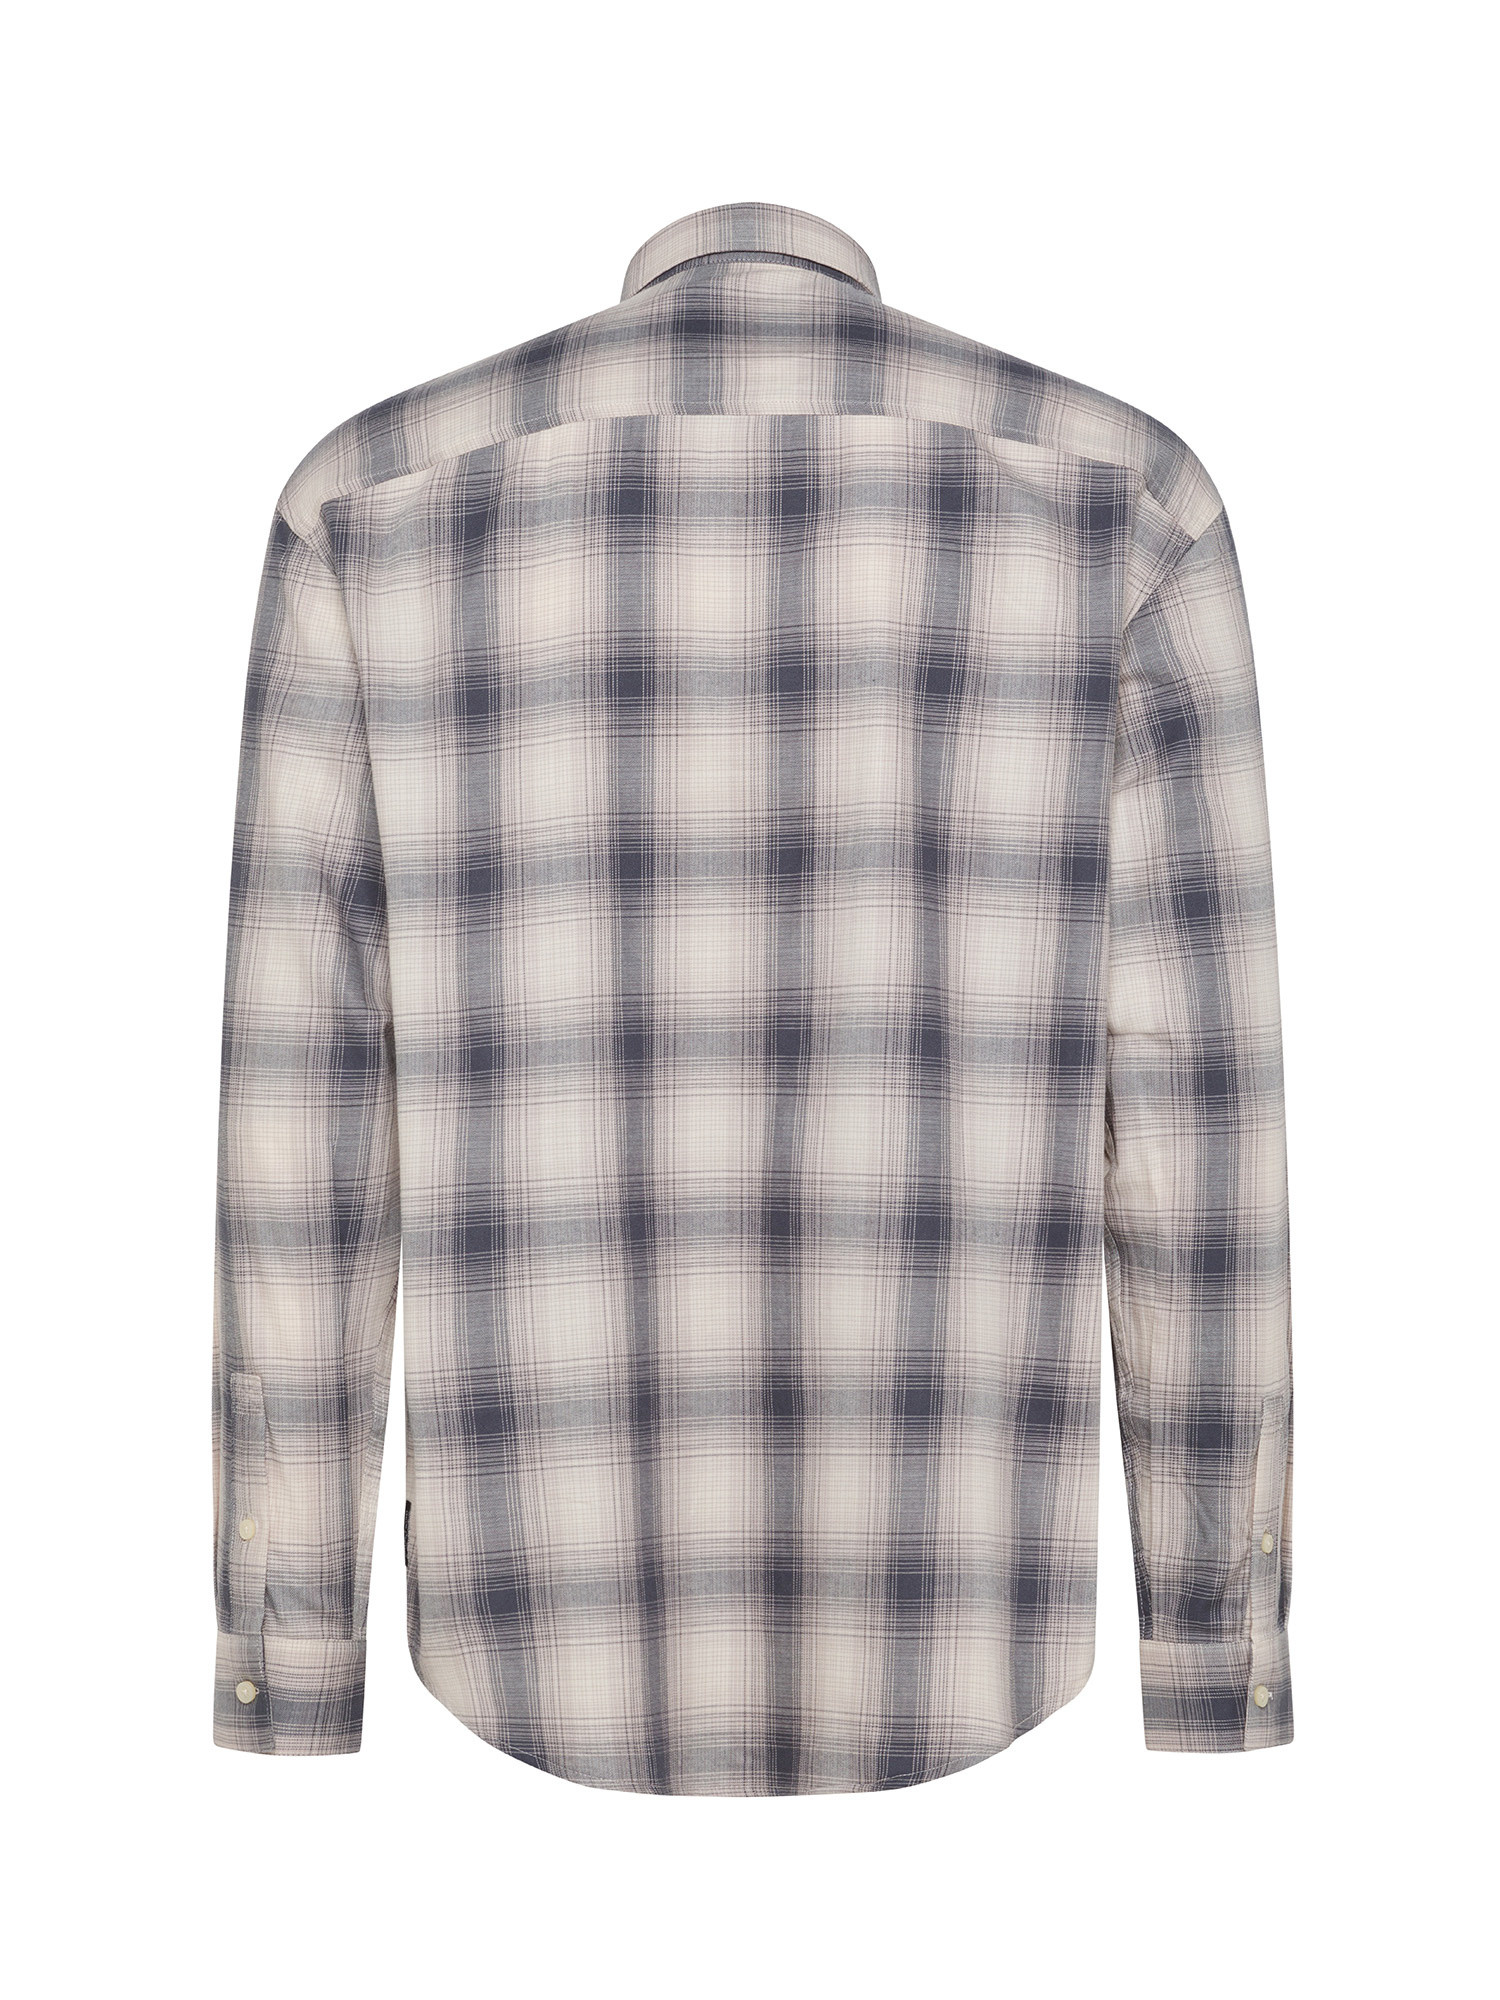 Armani Exchange - Checked shirt in cotton flannel, Beige, large image number 1